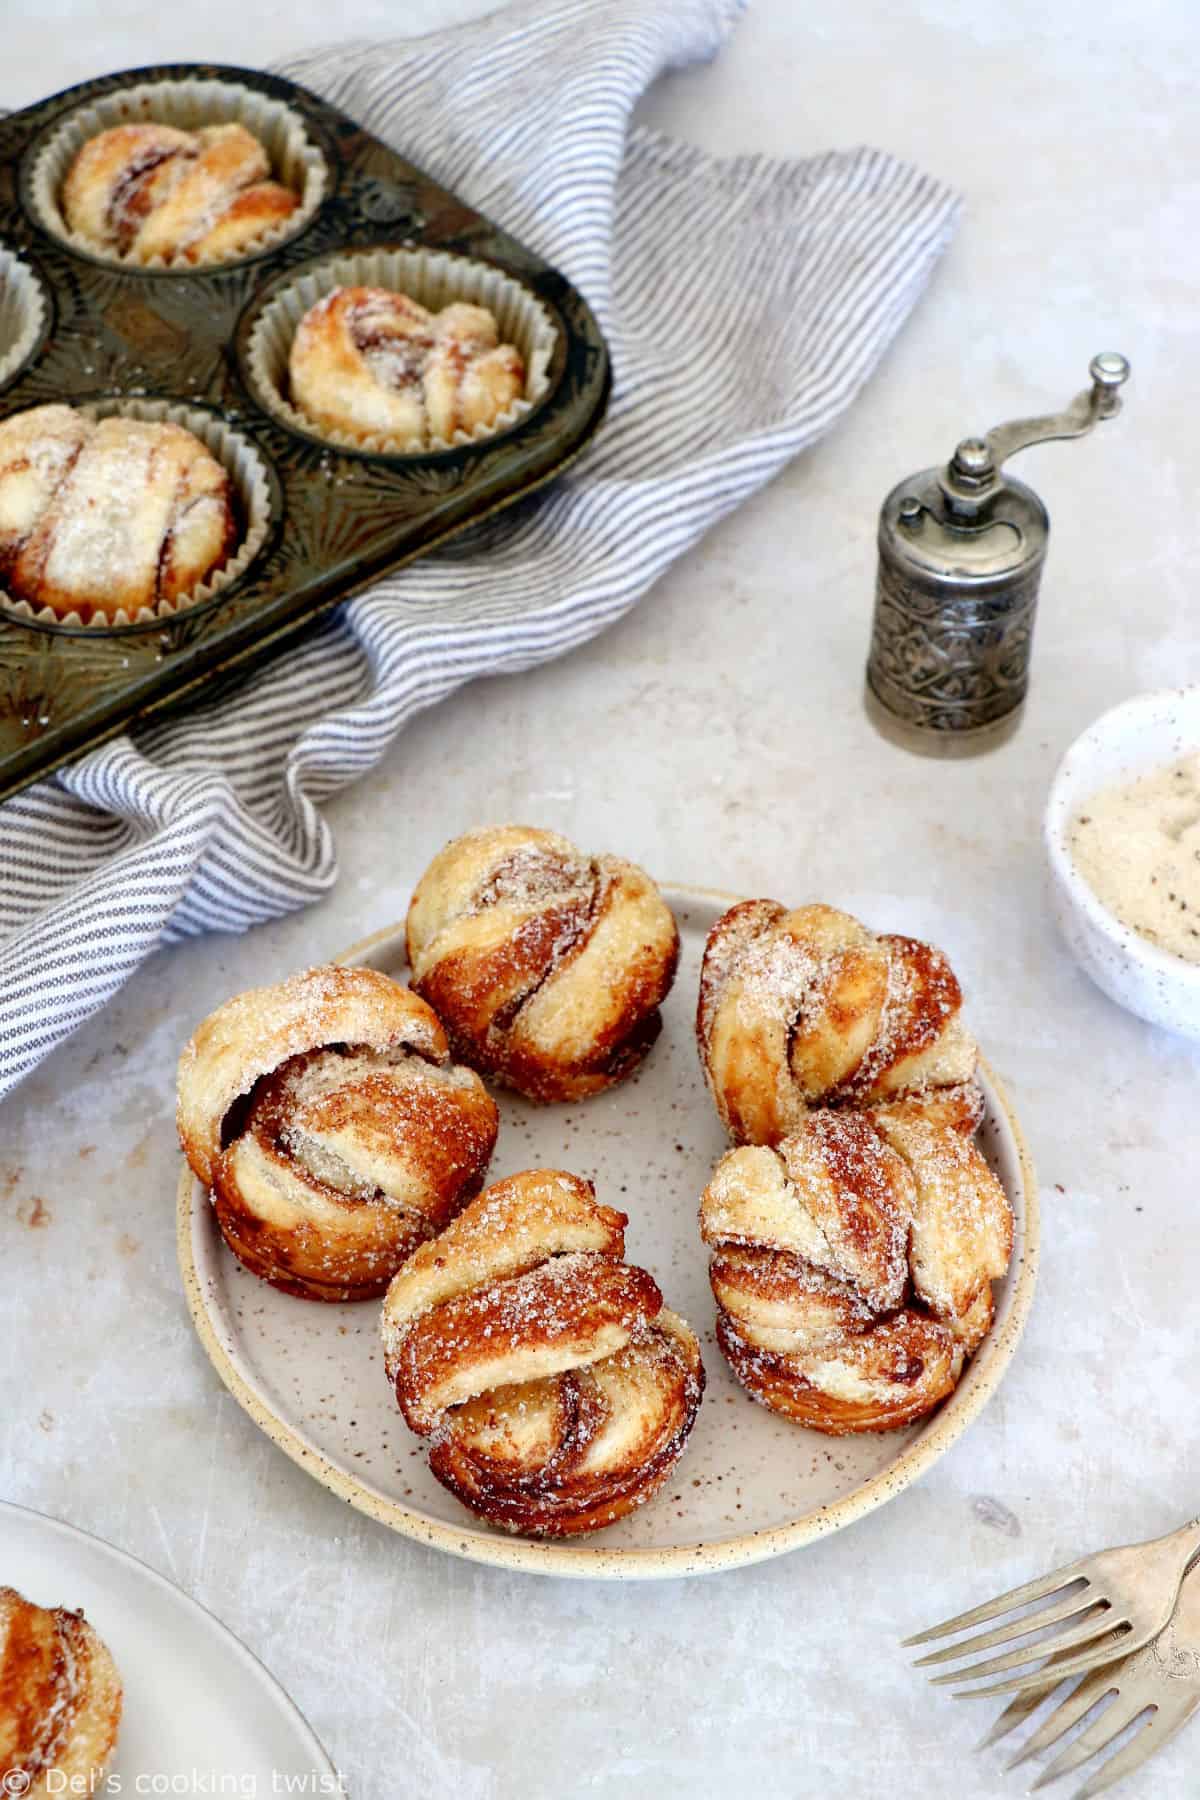 This easy cinnamon cardamom muffins recipe is a cross between a croissant and a muffin. In this easy version, the croissant dough is replaced with puff pastry, filled with cinnamon and coated in a cardamon-sugar mixture.